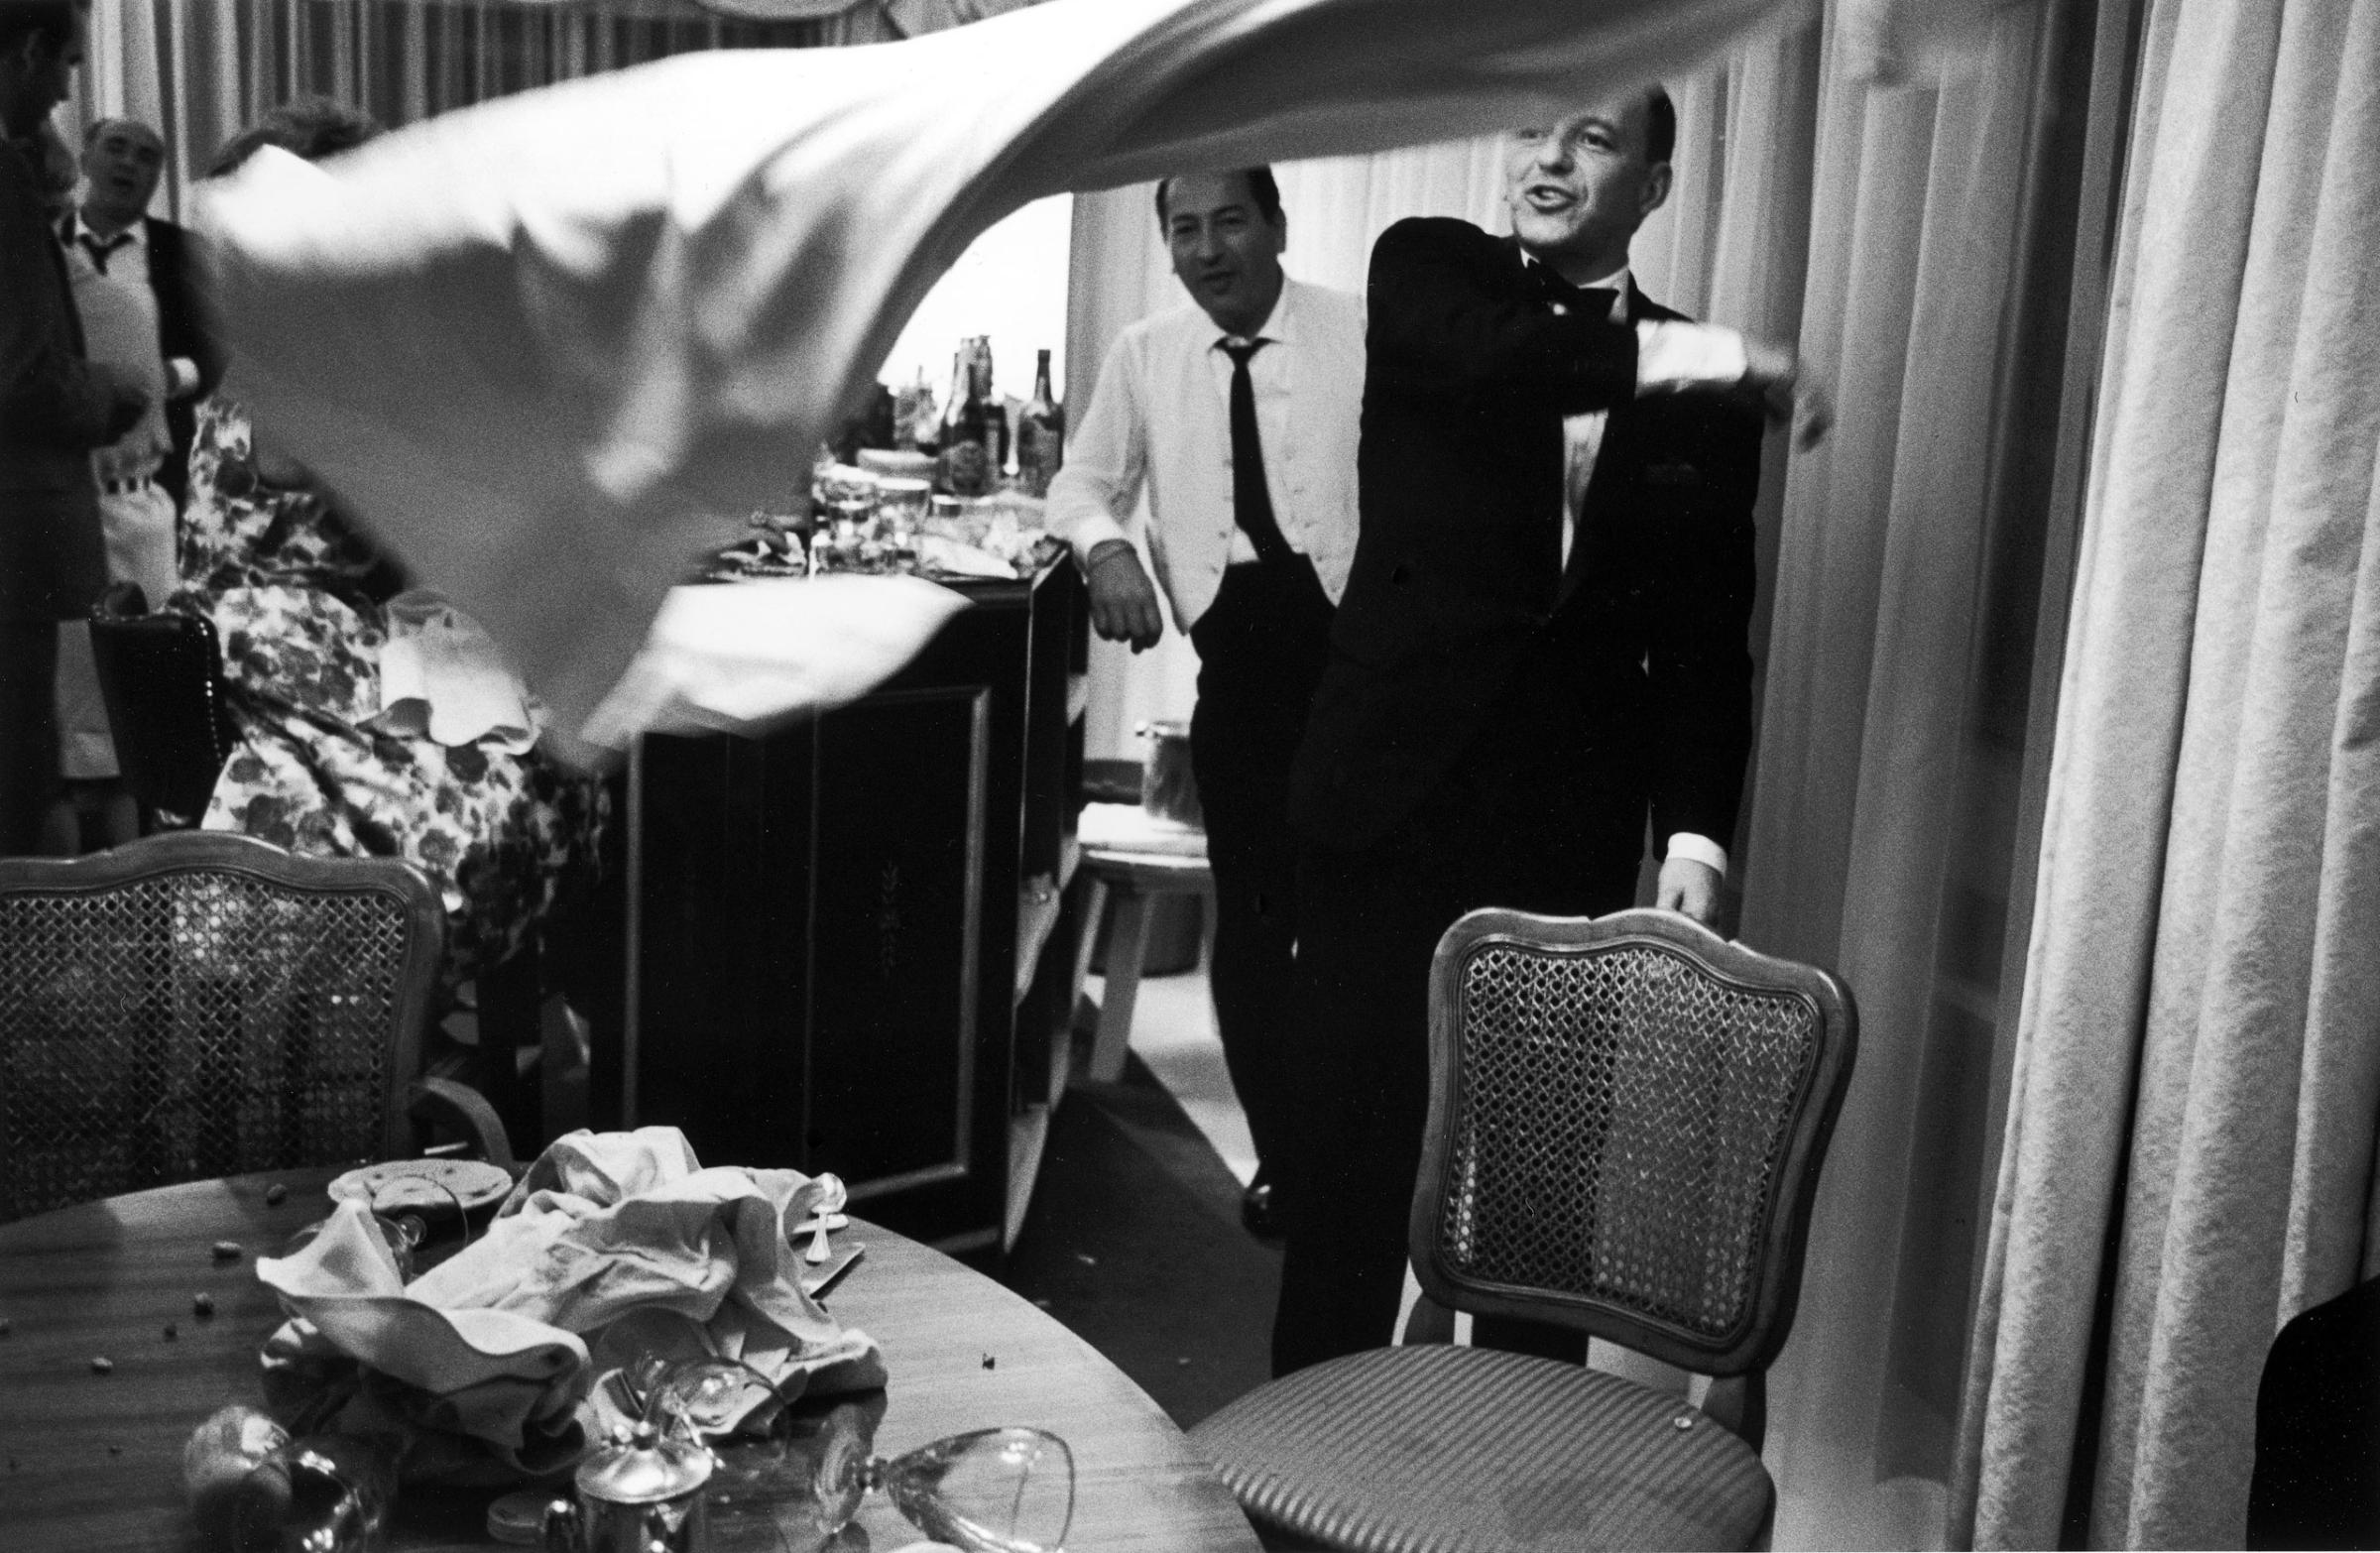 In Miami in 1965, Frank Sinatra tosses a tablecloth after yanking it from a cluttered tabletop.